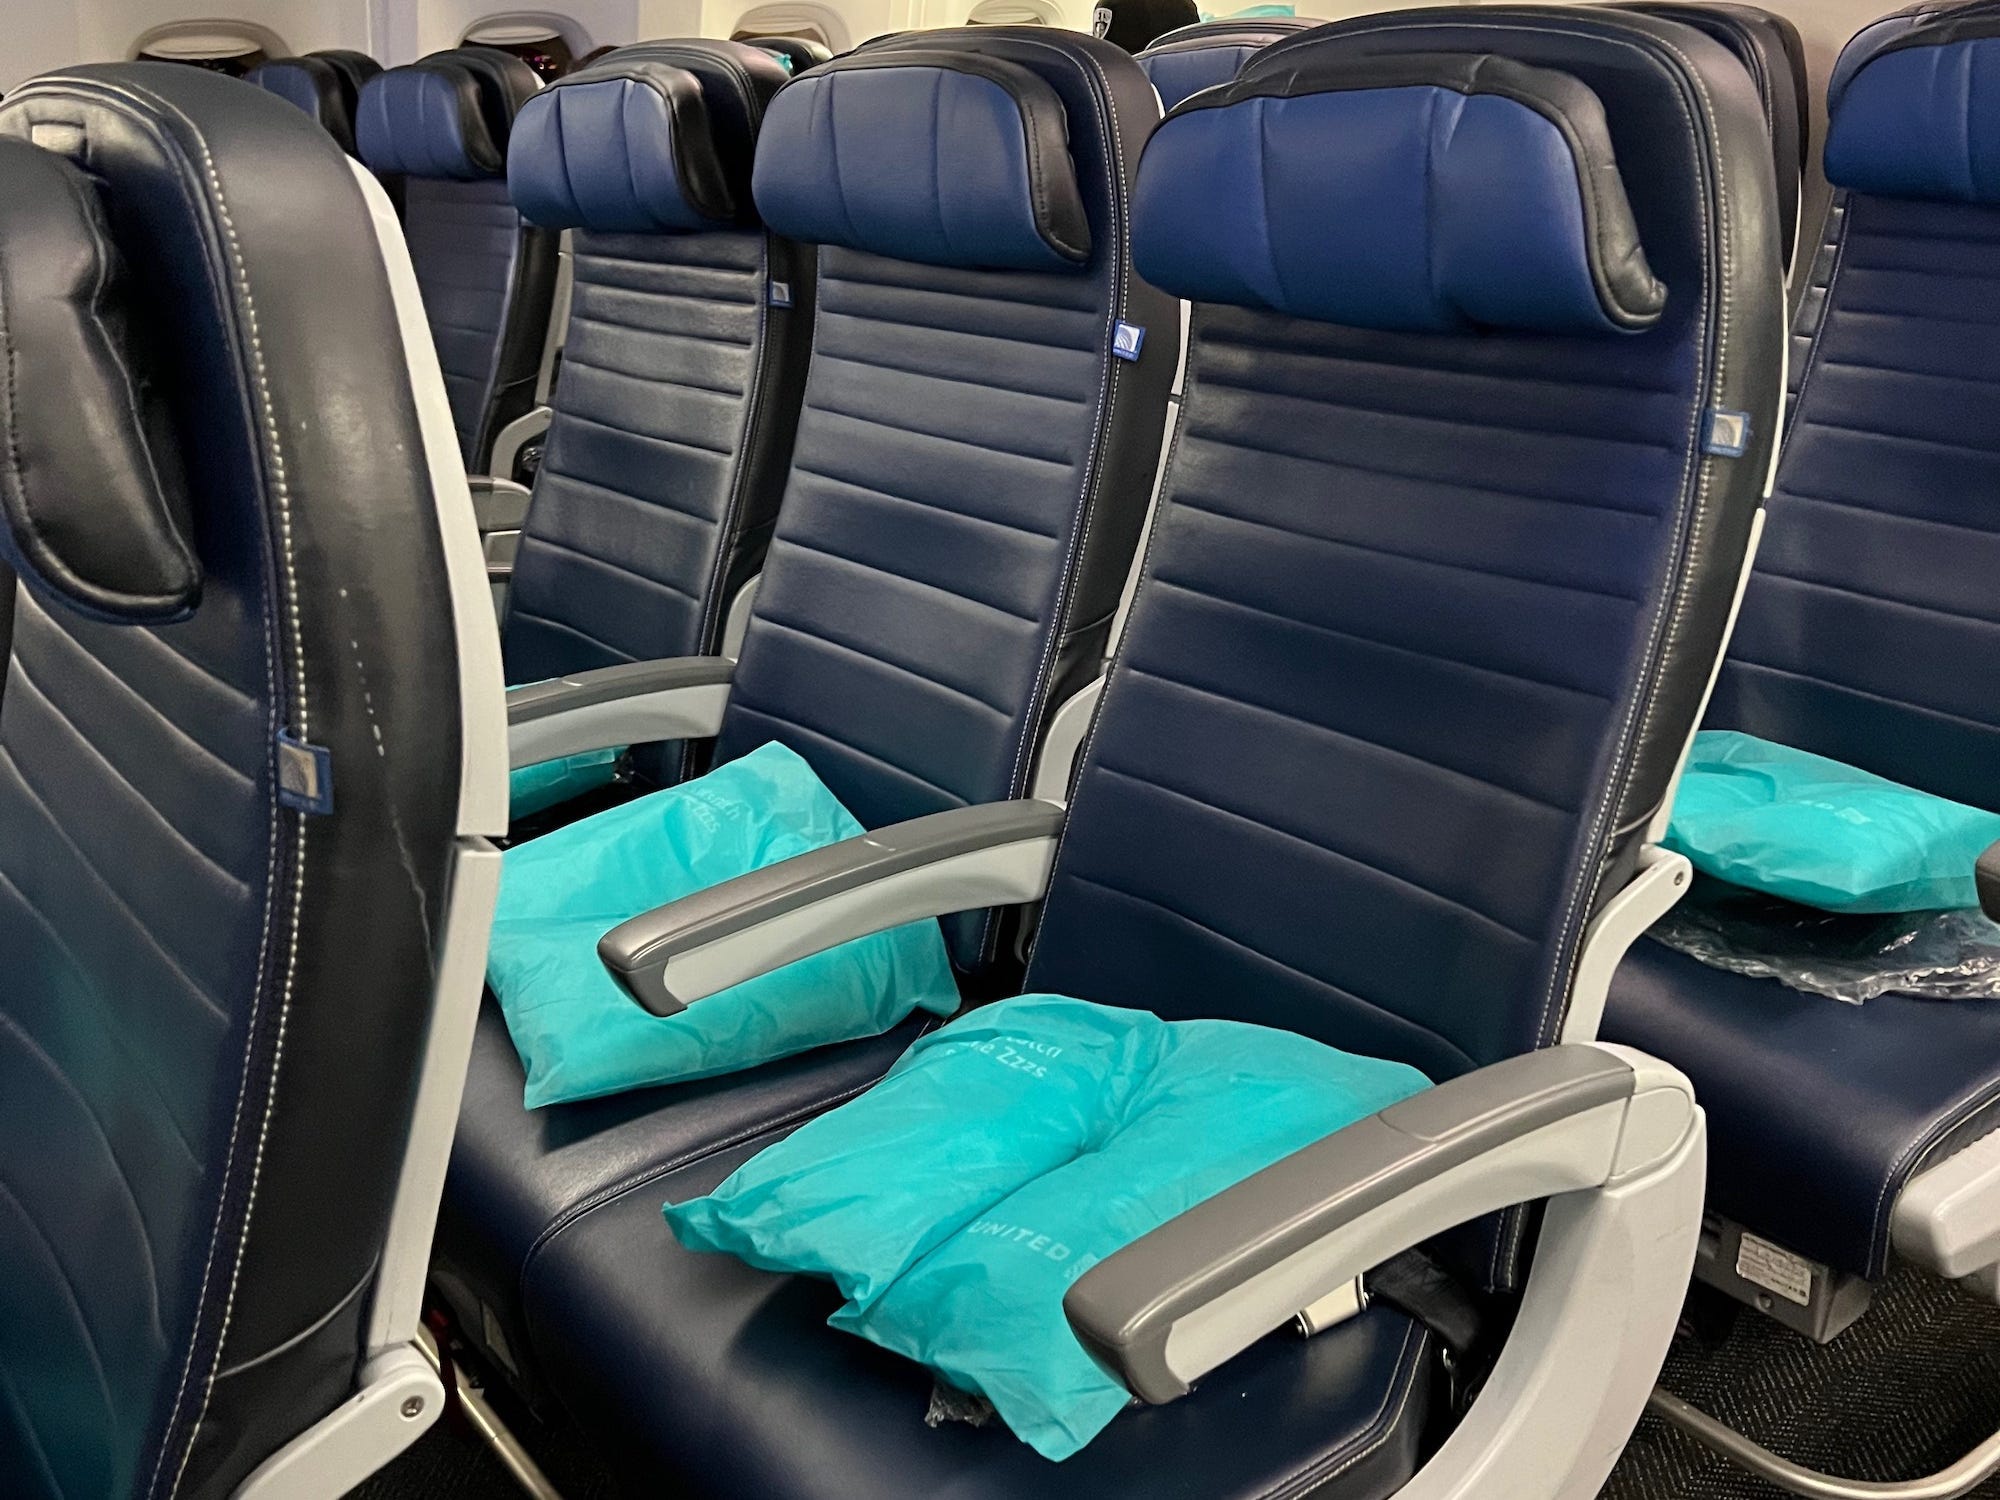 <p>I've also flown on Air Canada, Delta, United, Finnair, Iberia, JetBlue Airways, <a href="https://www.businessinsider.com/norse-atlantic-flight-review-paris-new-york-2023-6">Norse Atlantic Airways</a>, and French Bee in economy across the Atlantic. </p><p>These airlines are a mix of major and low-cost carriers with varying food and baggage rules, but I find the economy products comparable in terms of space and comfort. I liked British Airways' economy seats better than those on United, Iberia, and Air Canada, though.</p><p>The best inflight food I've had was on Finnair and JetBlue, so I'd recommend those for anyone needing a solid meal. The latter also boasts the roomiest seat pitch at 32 inches.</p>